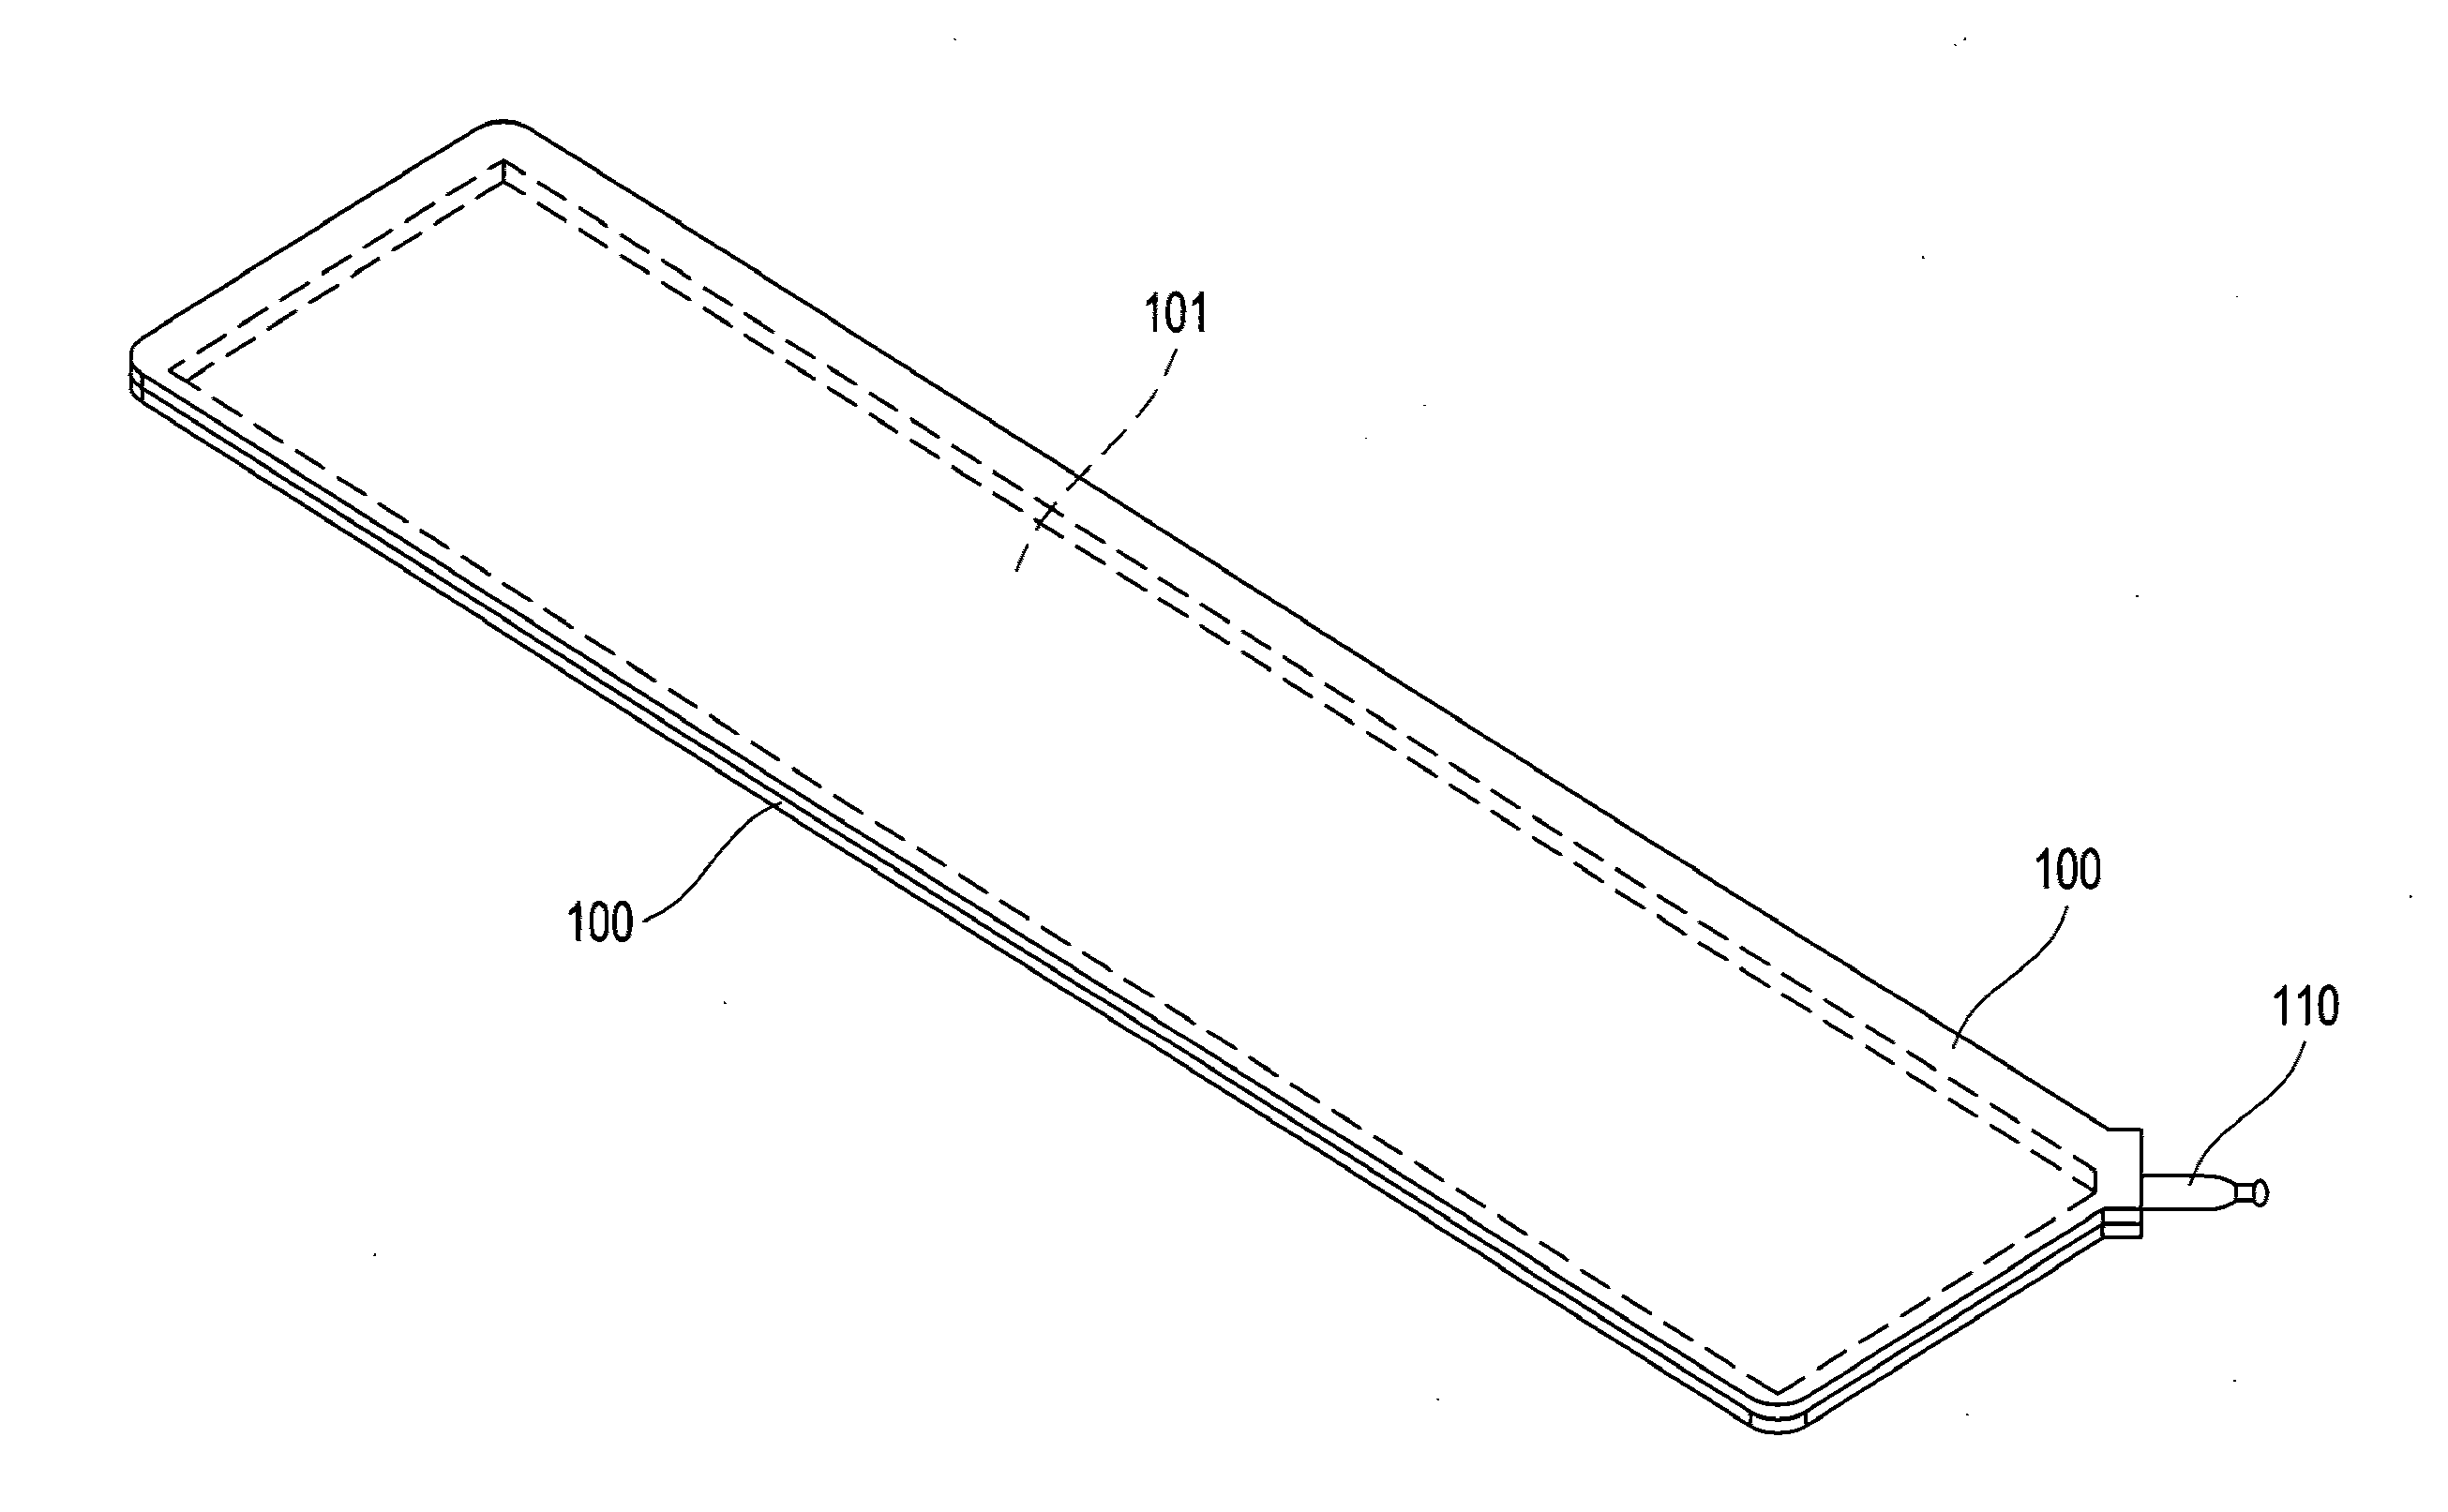 Structure of heat plate